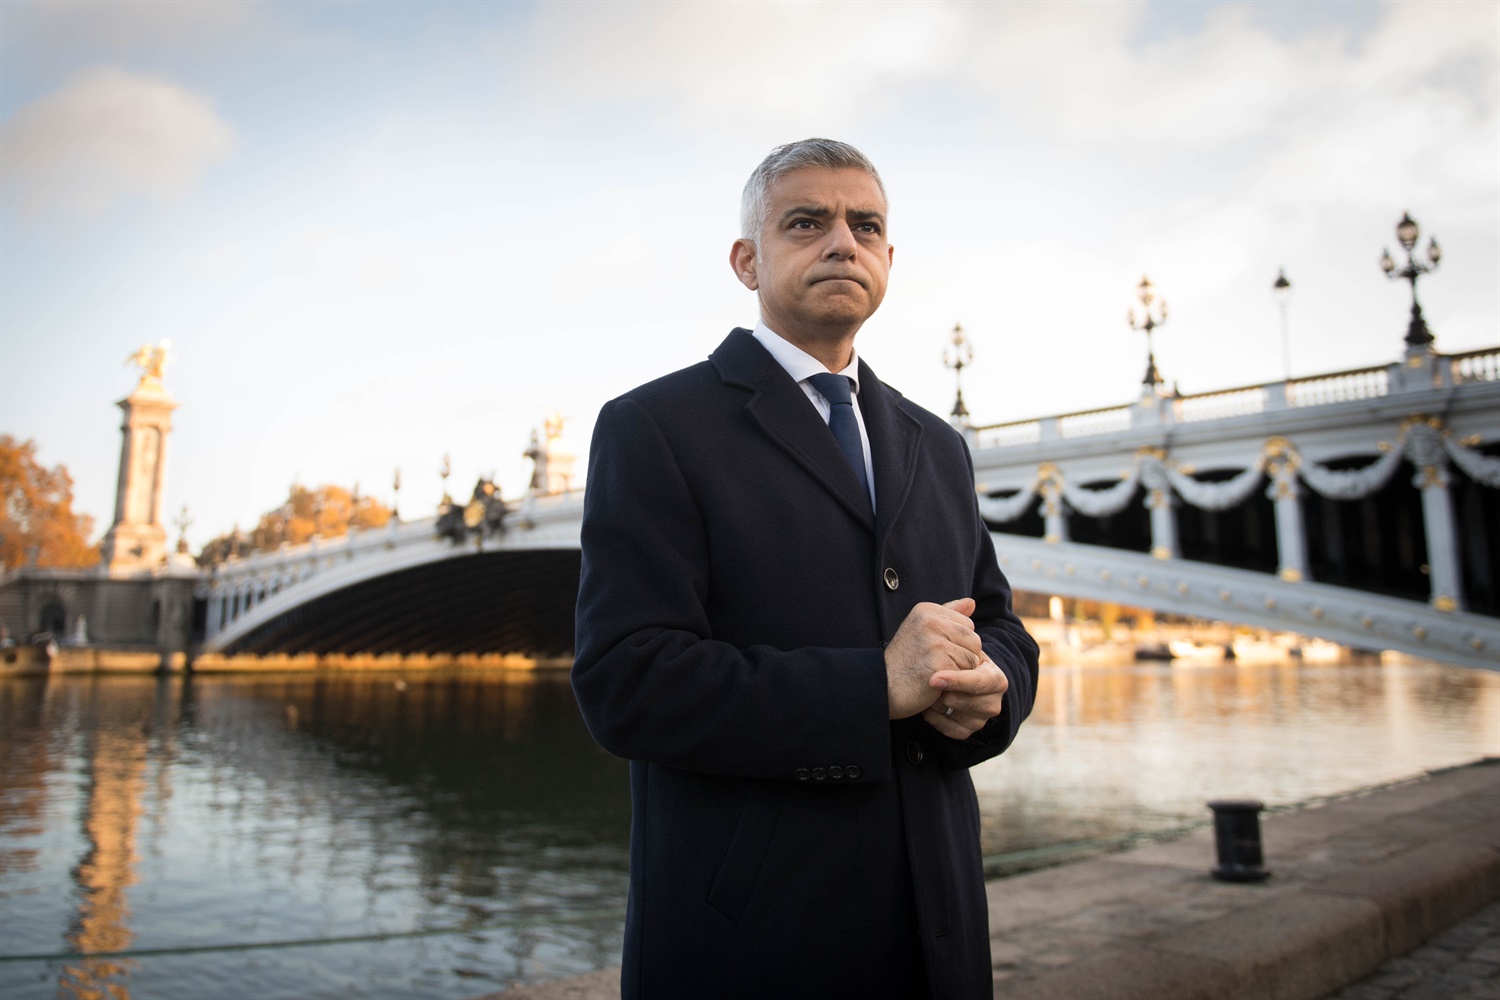 London mayor criticised after appointing former auditor and advisor to investigate Crossrail delays